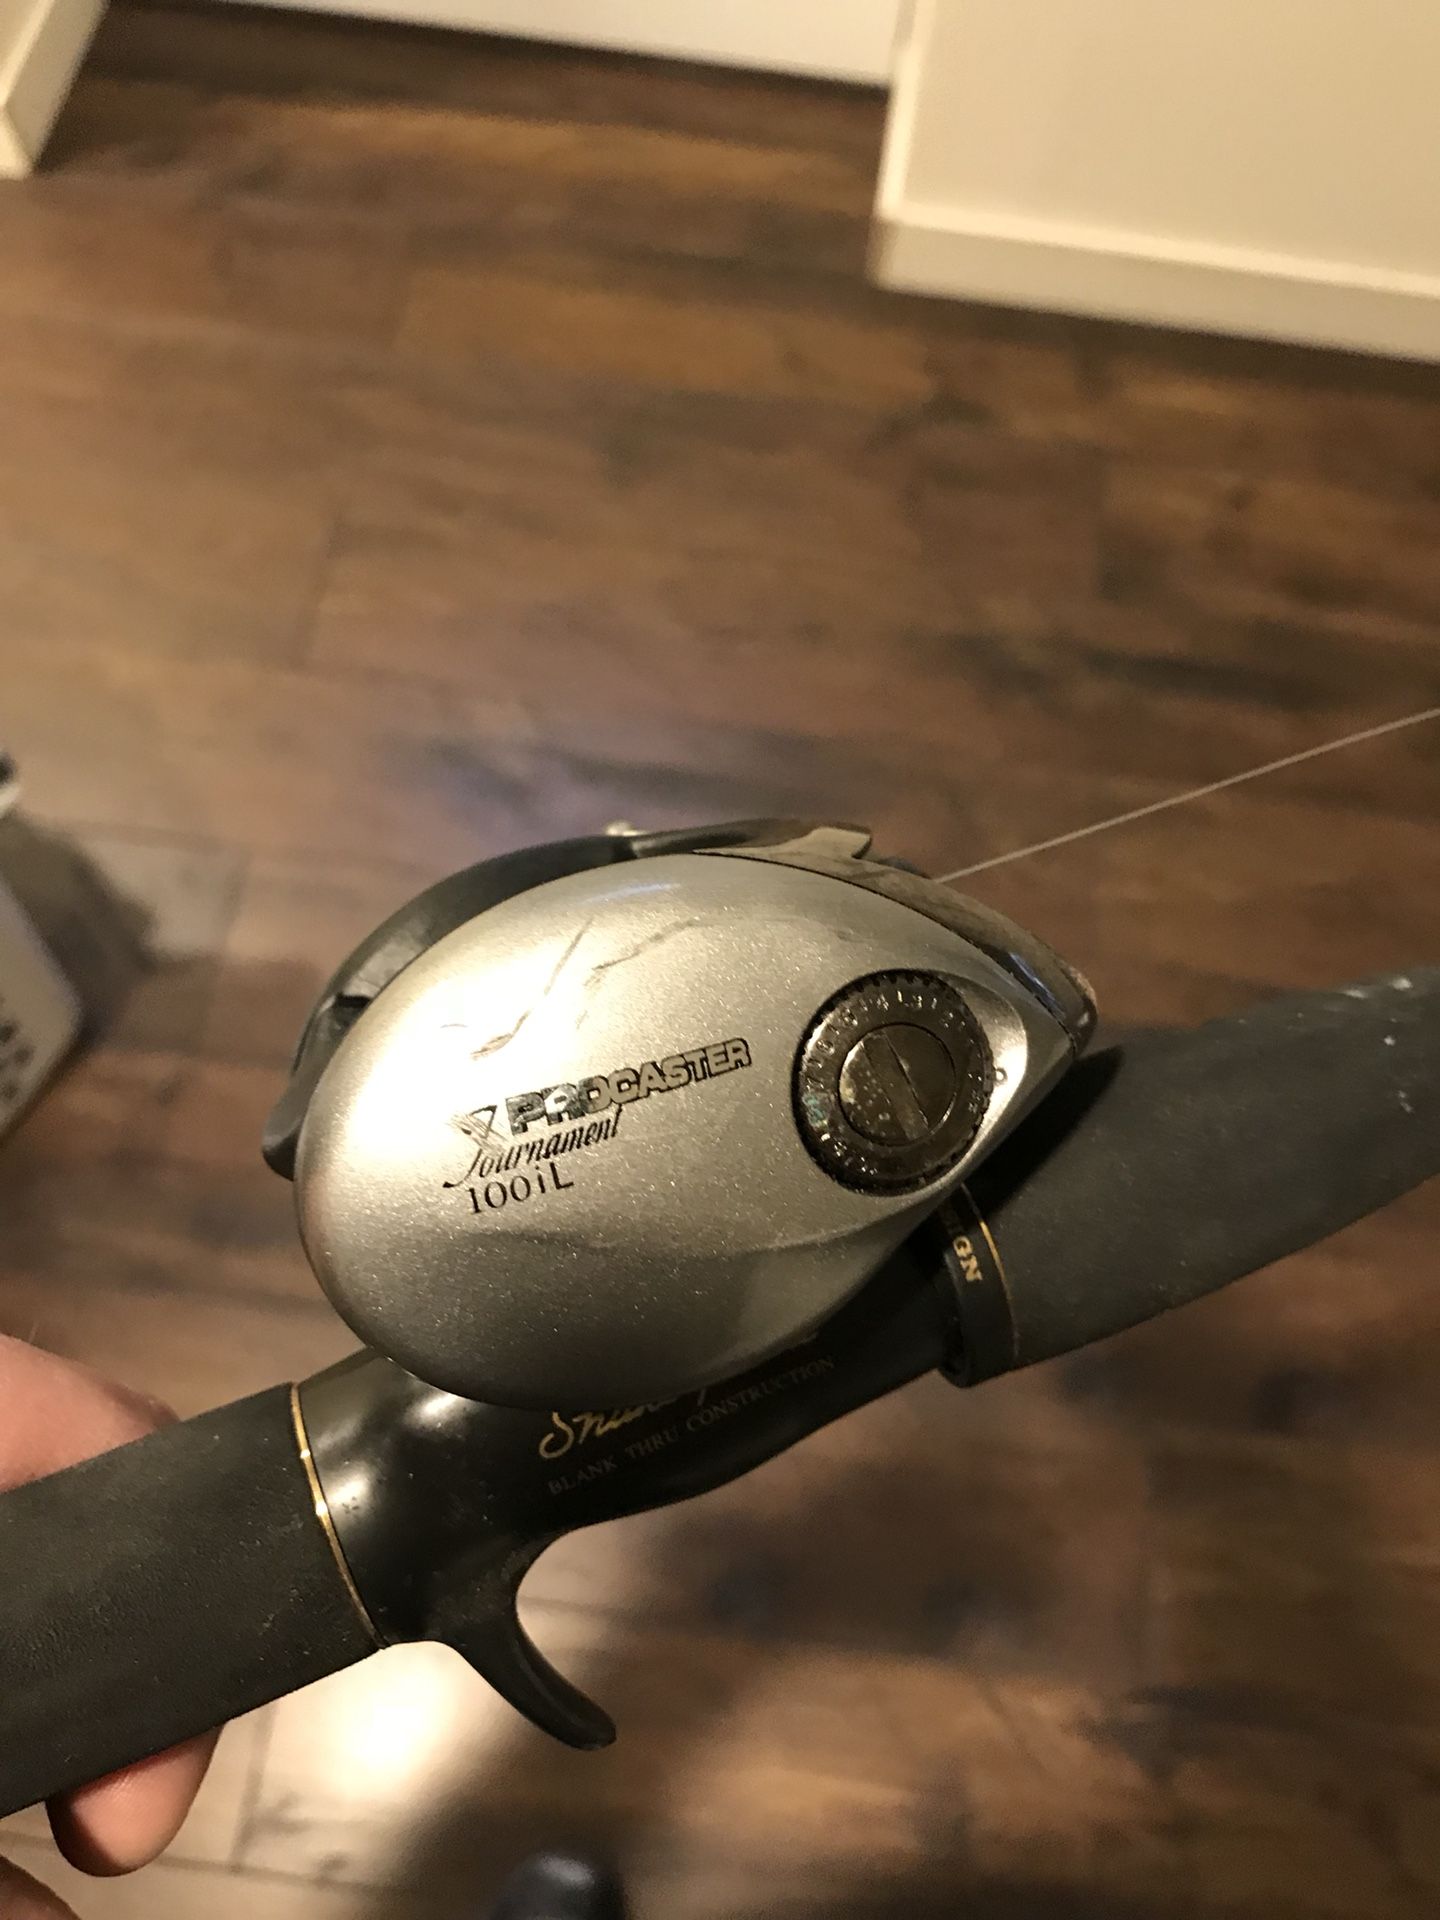 Daiwa procaster tournament 100il ugly stick 6'6” medium action 8-20 pound  line for Sale in Tacoma, WA - OfferUp